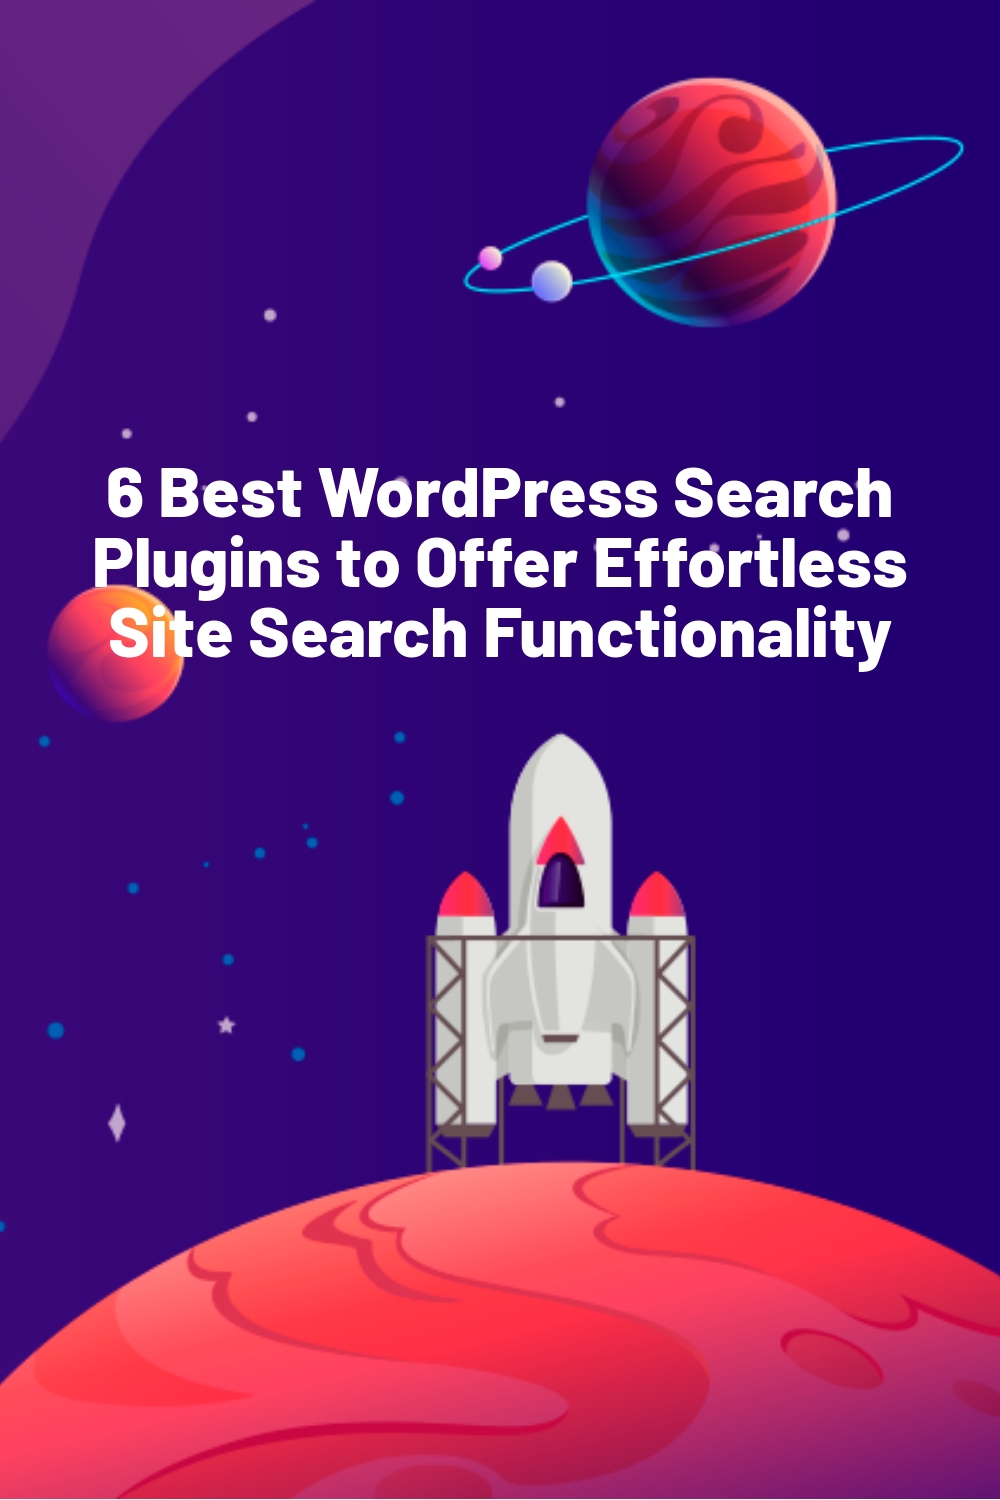 6 Best WordPress Search Plugins to Offer Effortless Site Search Functionality